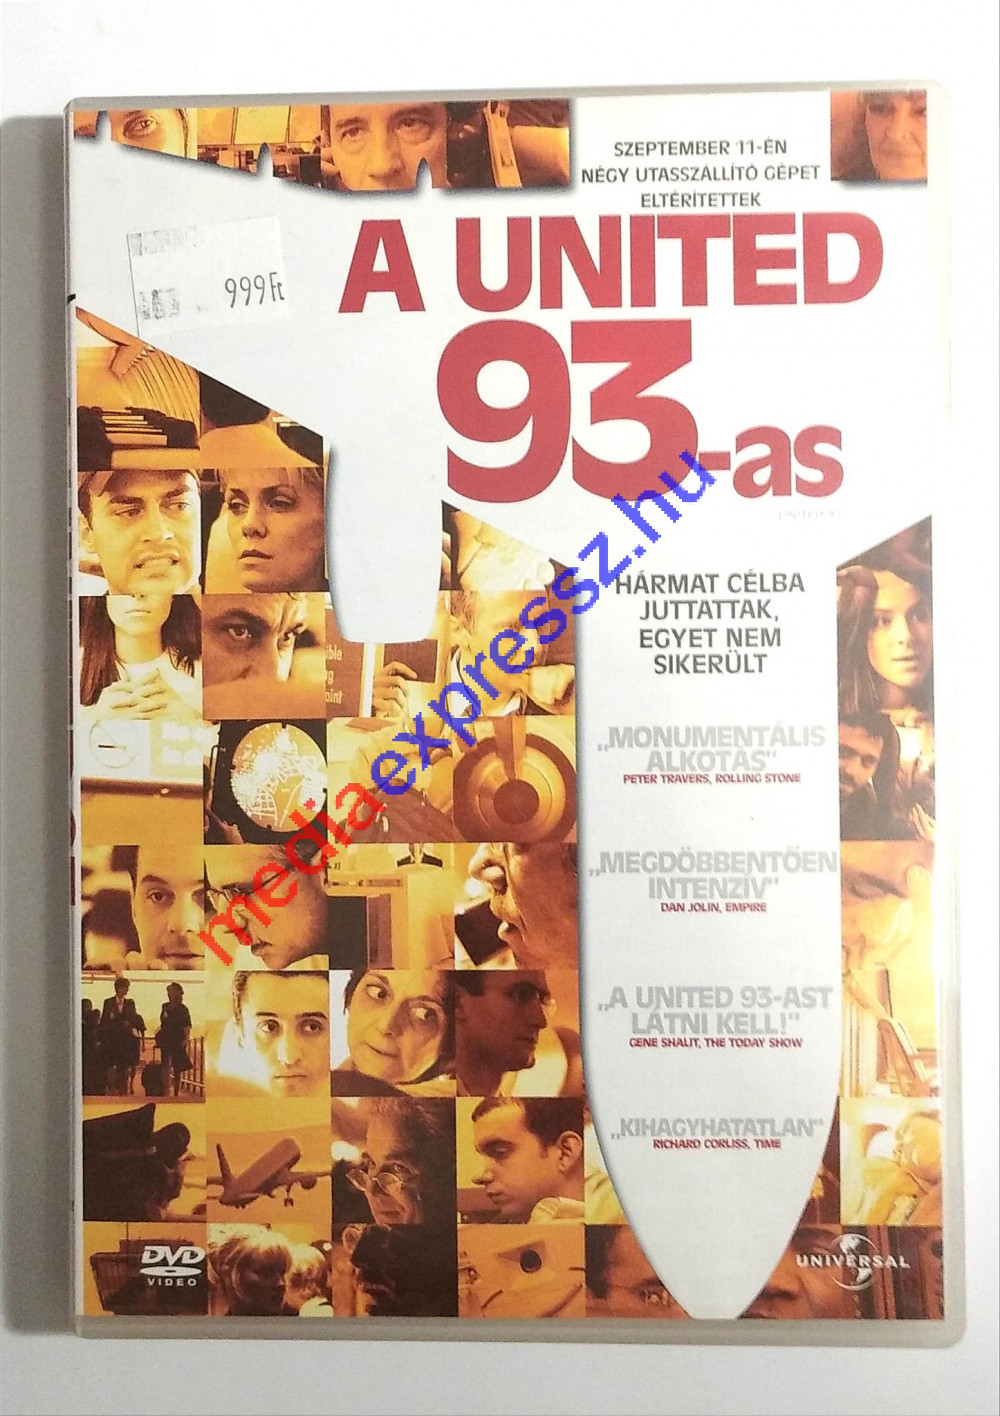 A united 93-as DVD